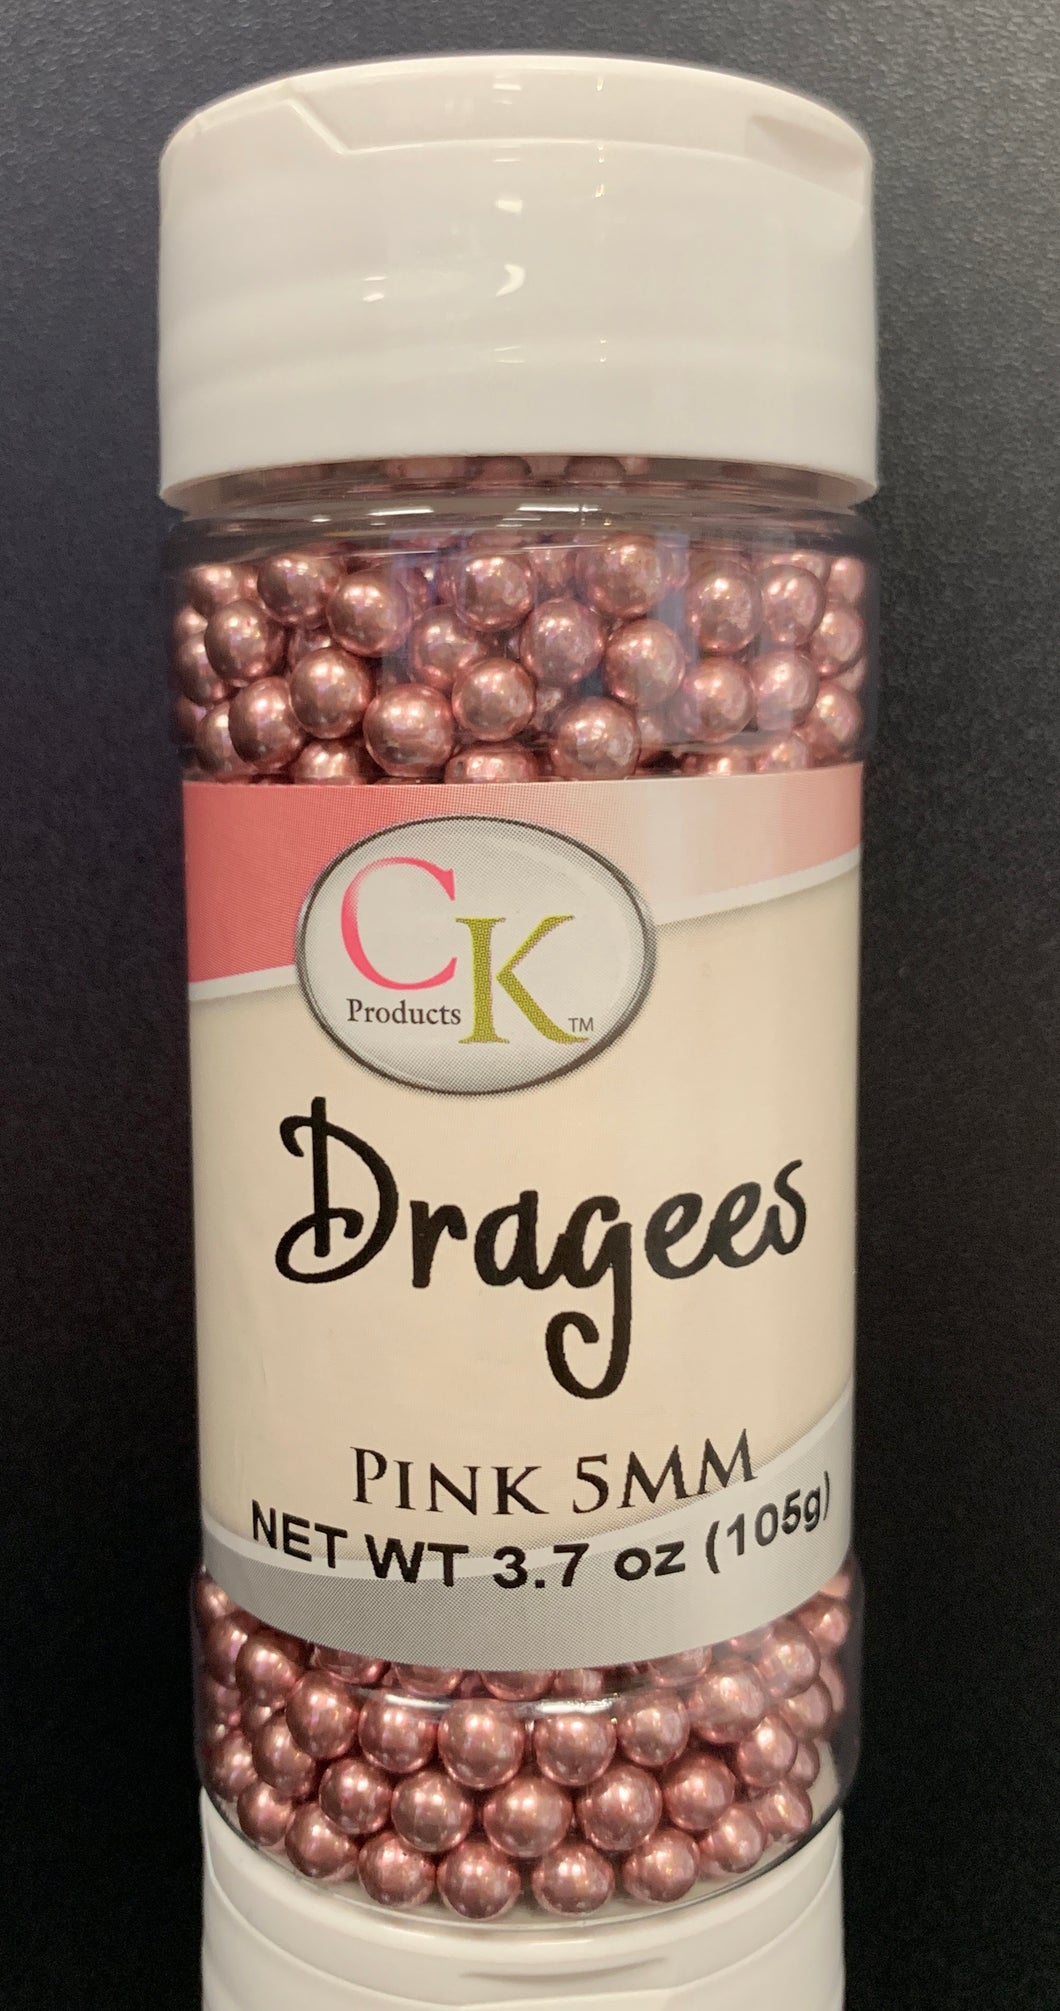 Dragees - Pink 5 mm $4.99